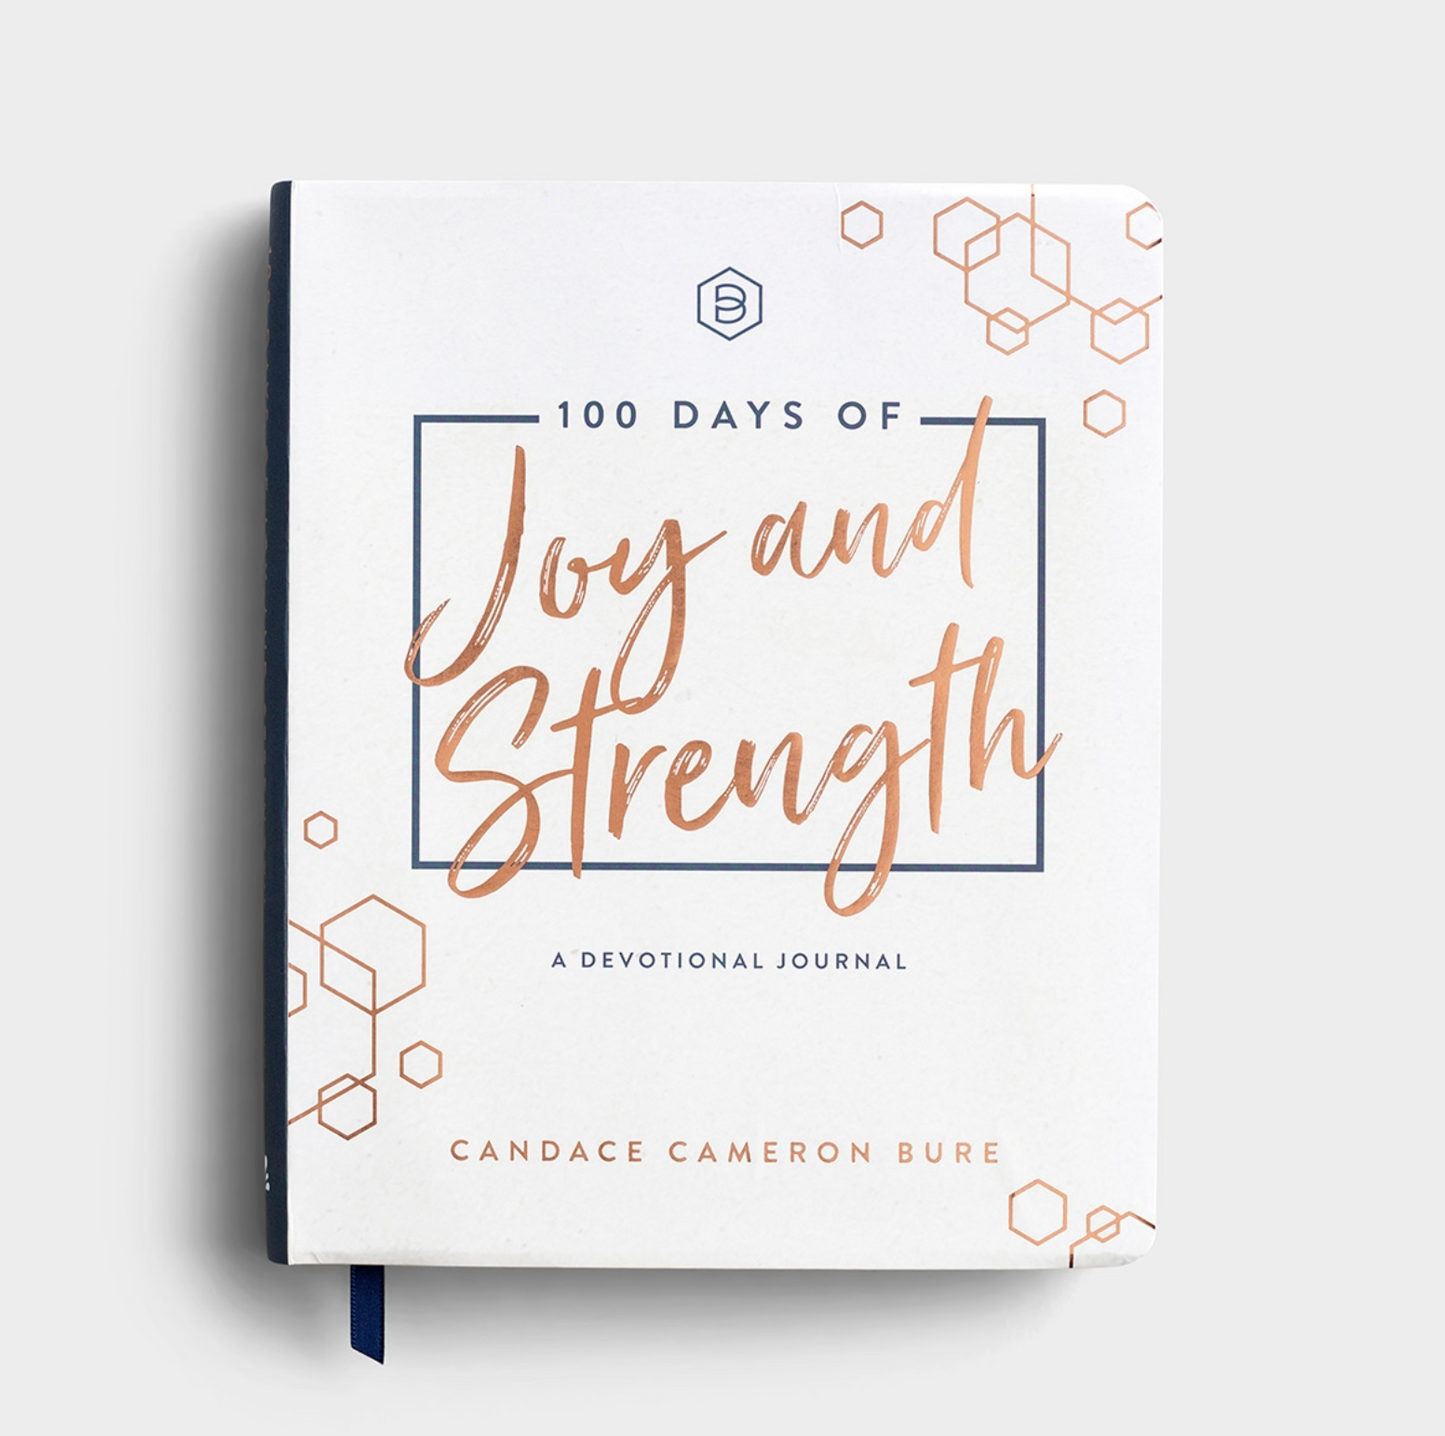 100 Days of Joy and Strength - A Devotional Journal by Candace Cameron Bure